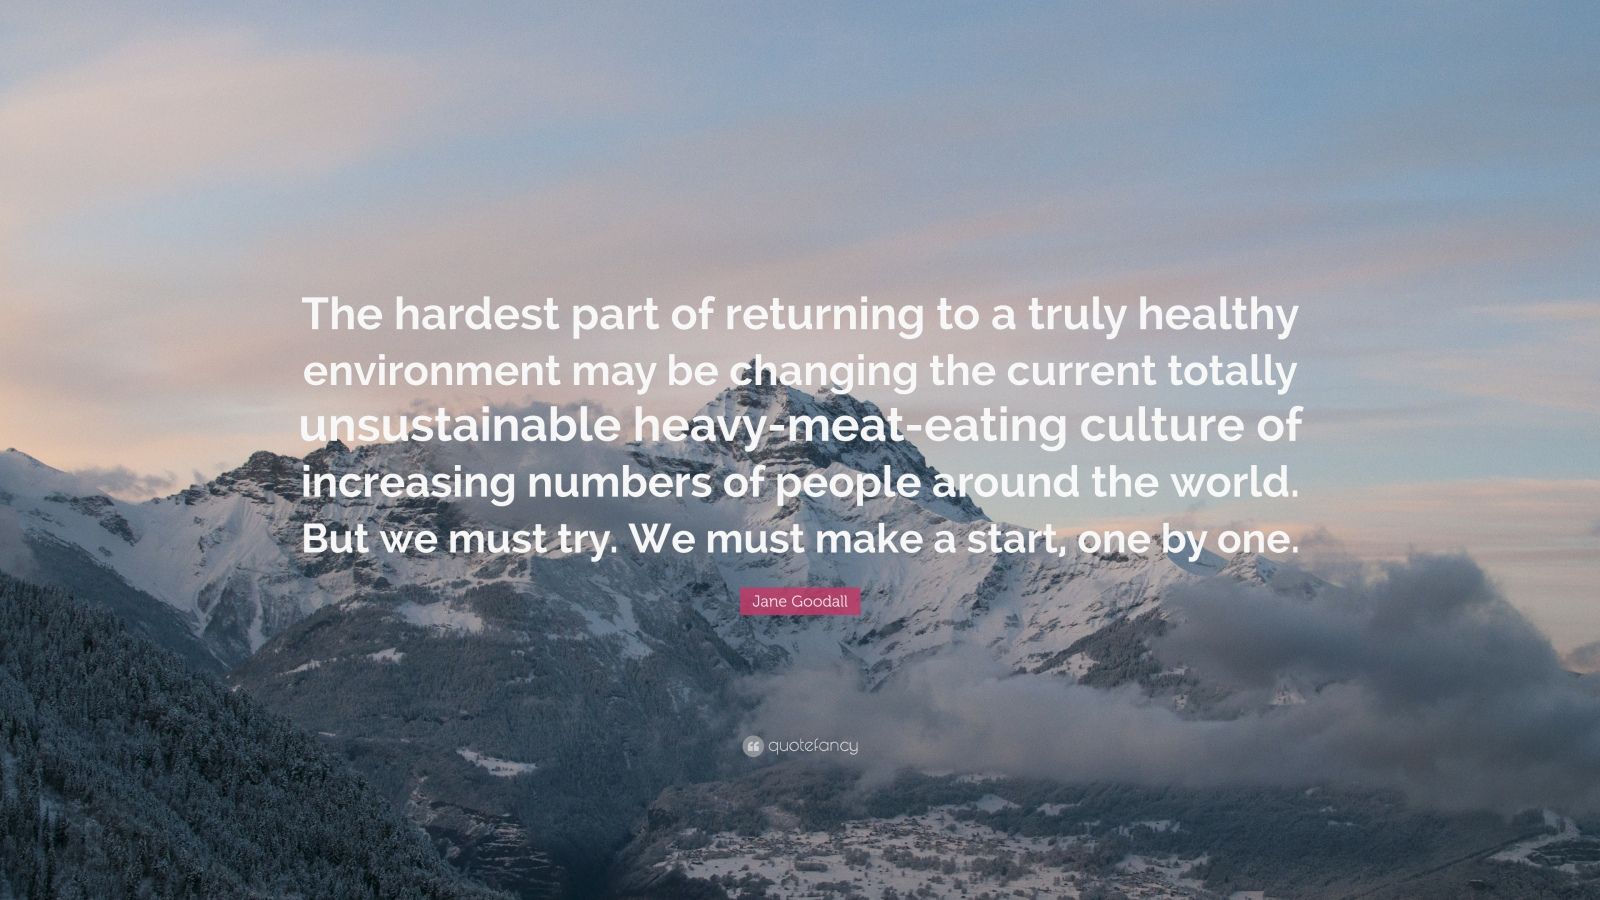 Jane Goodall Quote: “The hardest part of returning to a truly healthy